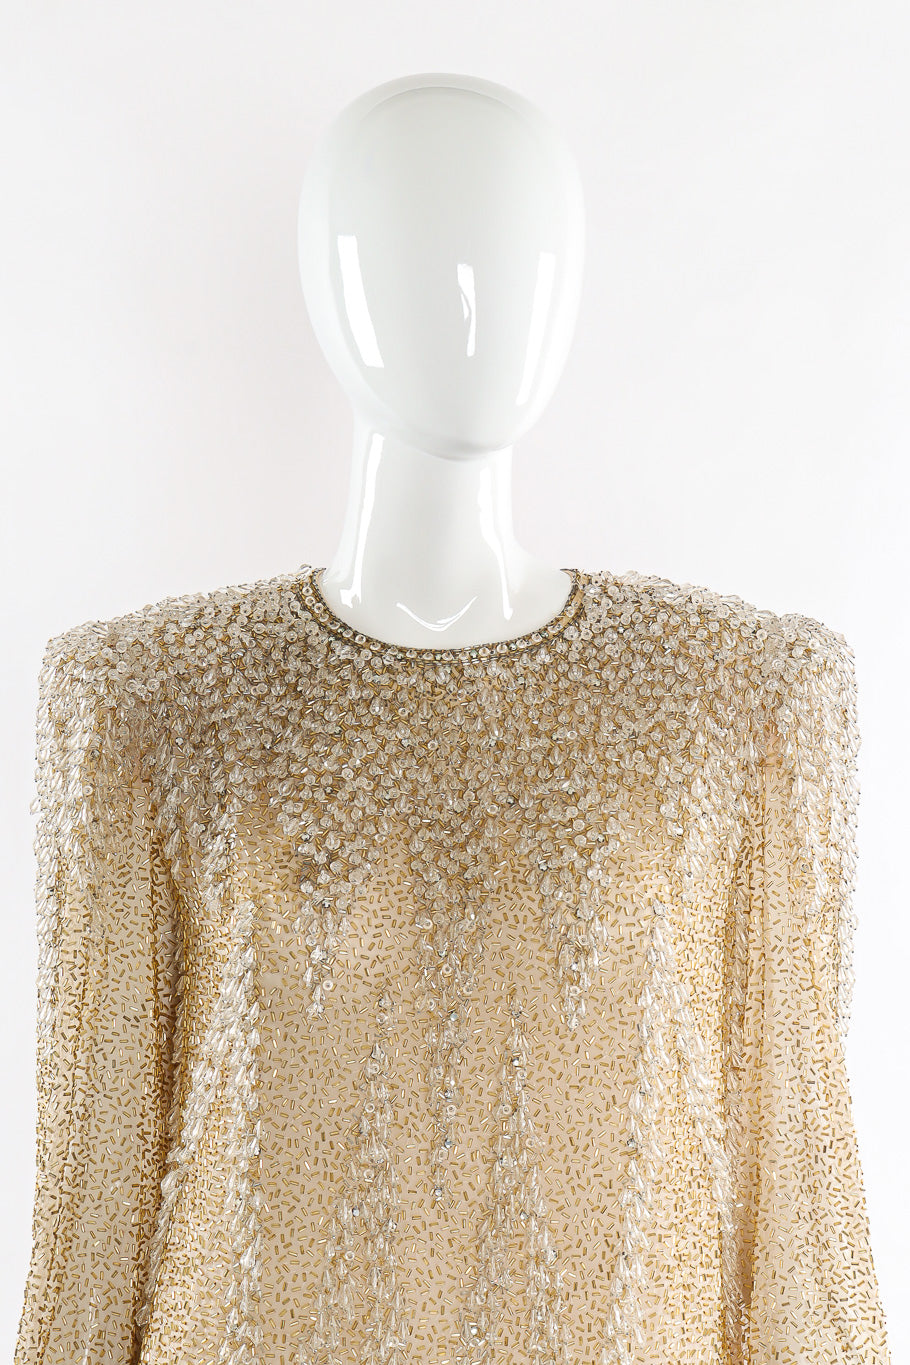 Beaded champagne silk shift dress by Victoria Royal Neck Detail Close-up. @recessla